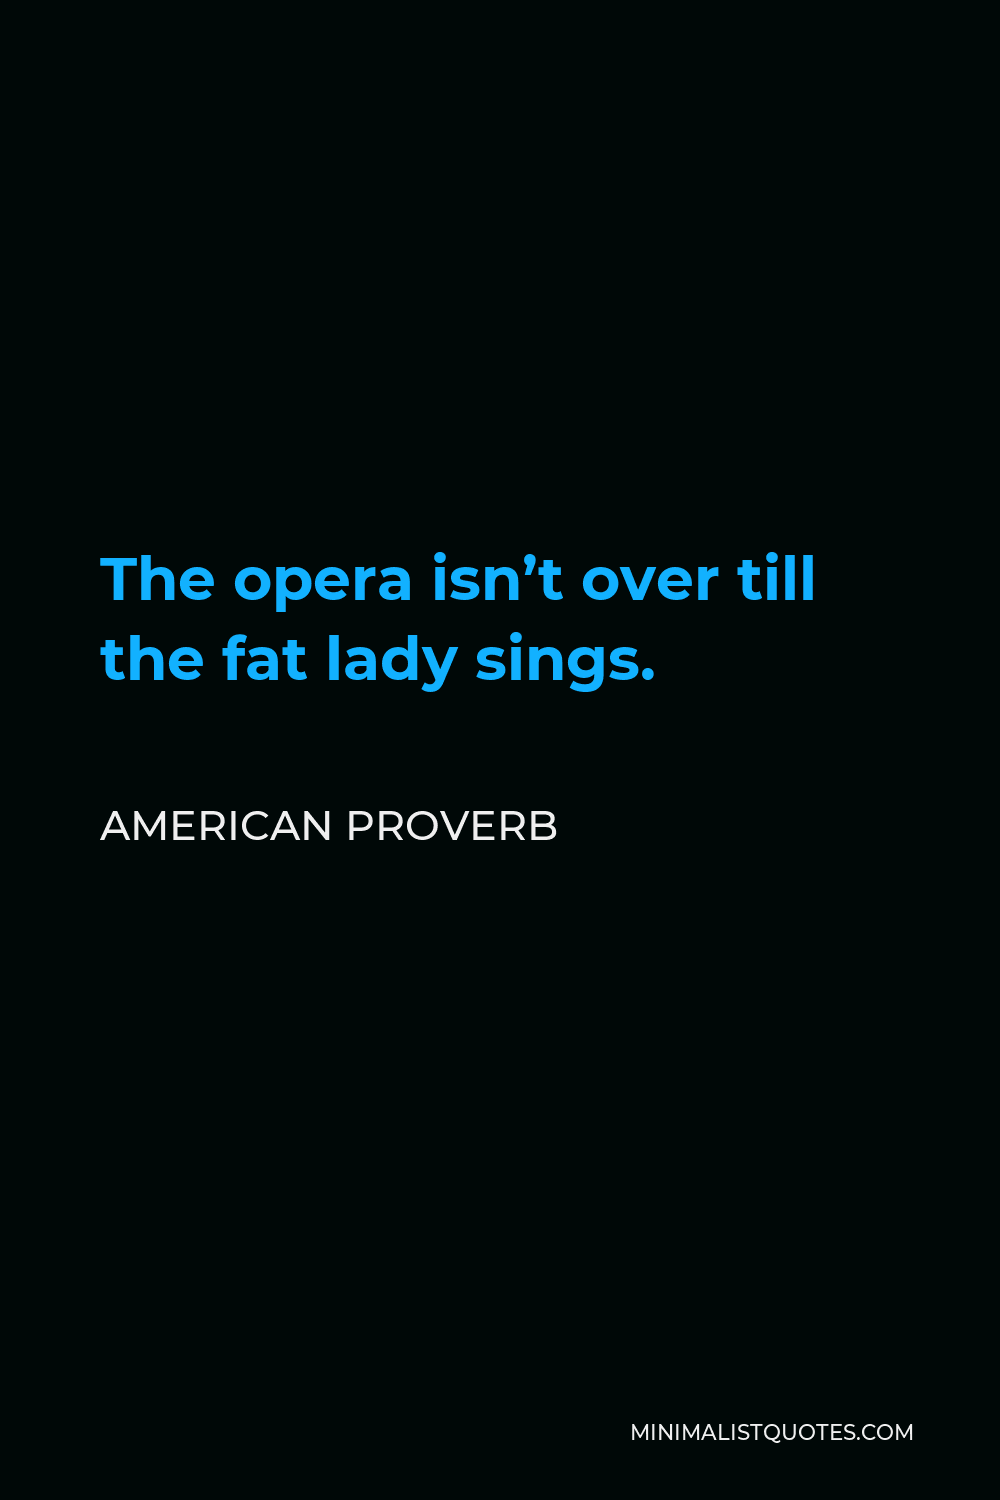 American Proverb Quote - The opera isn’t over till the fat lady sings.